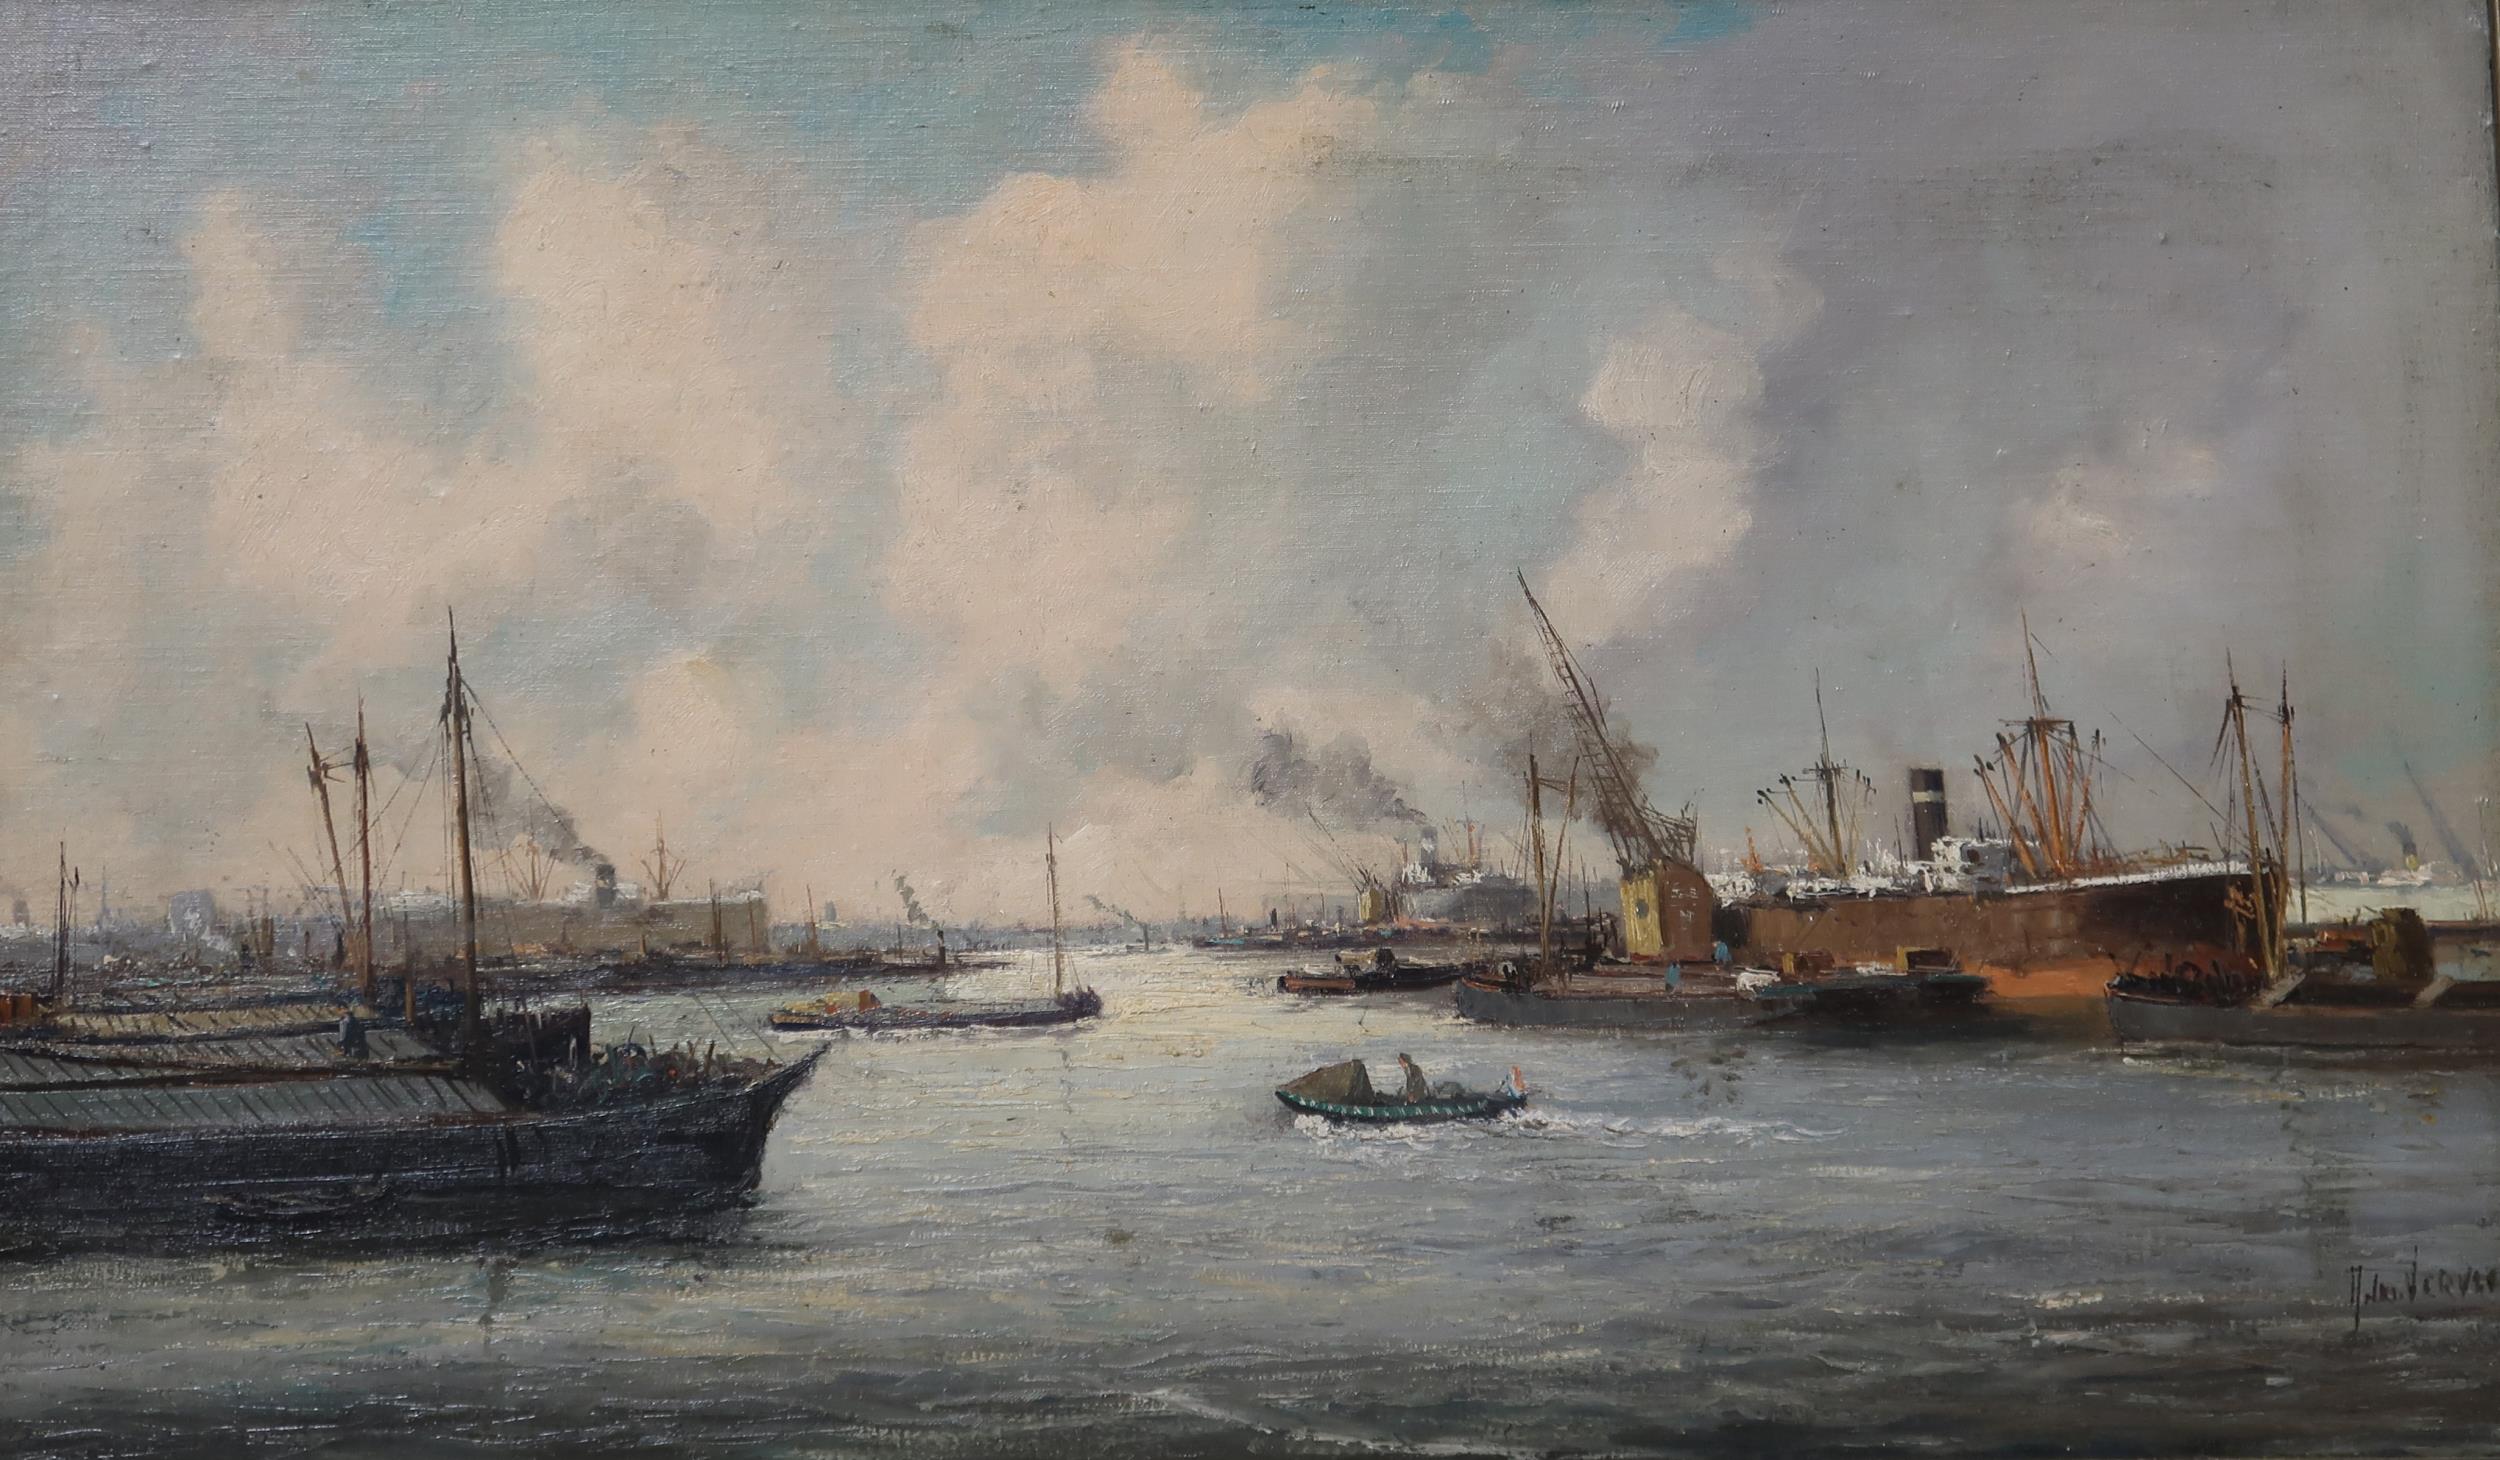 ADRIANUS VERVEEN (DUTCH 1912-1988)  ROTTERDAM HARBOUR SCENE  Oil on canvas, signed lower right, 58 x